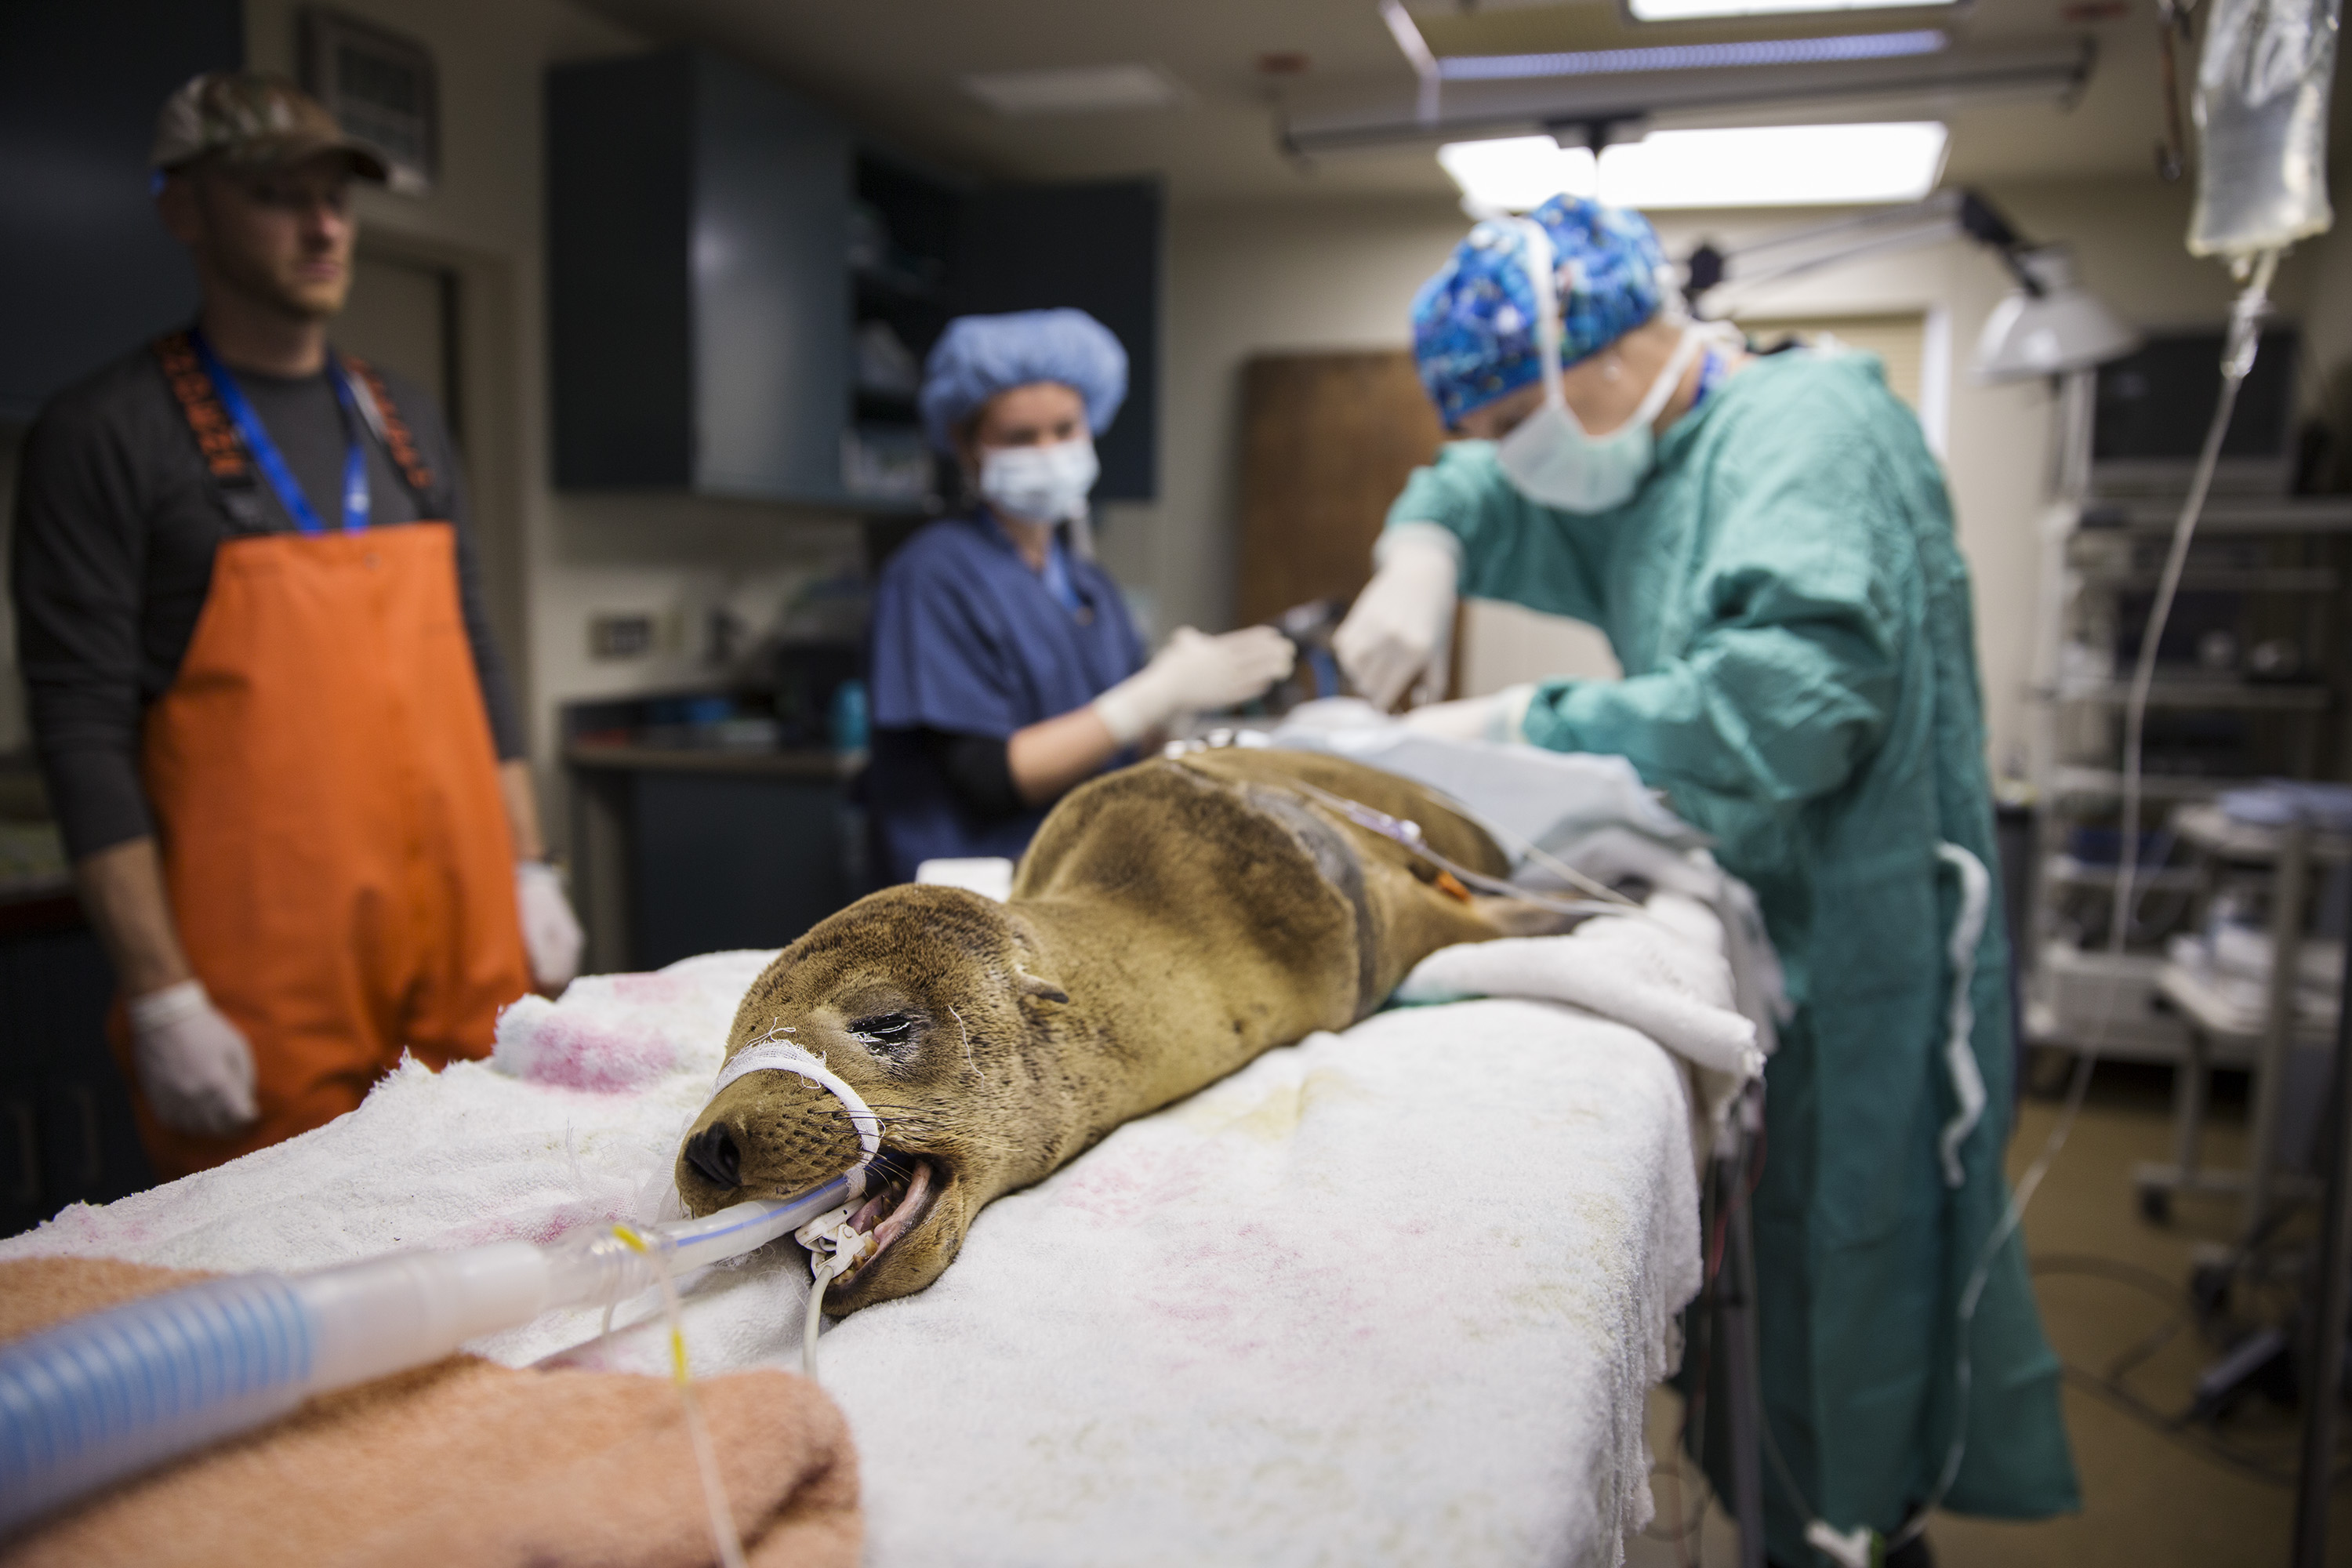 A California sea lion pup undergoes surgery for a lymph node abscess at the Marine Mammal Center in Marin County, Calif. on May 9, 2014.